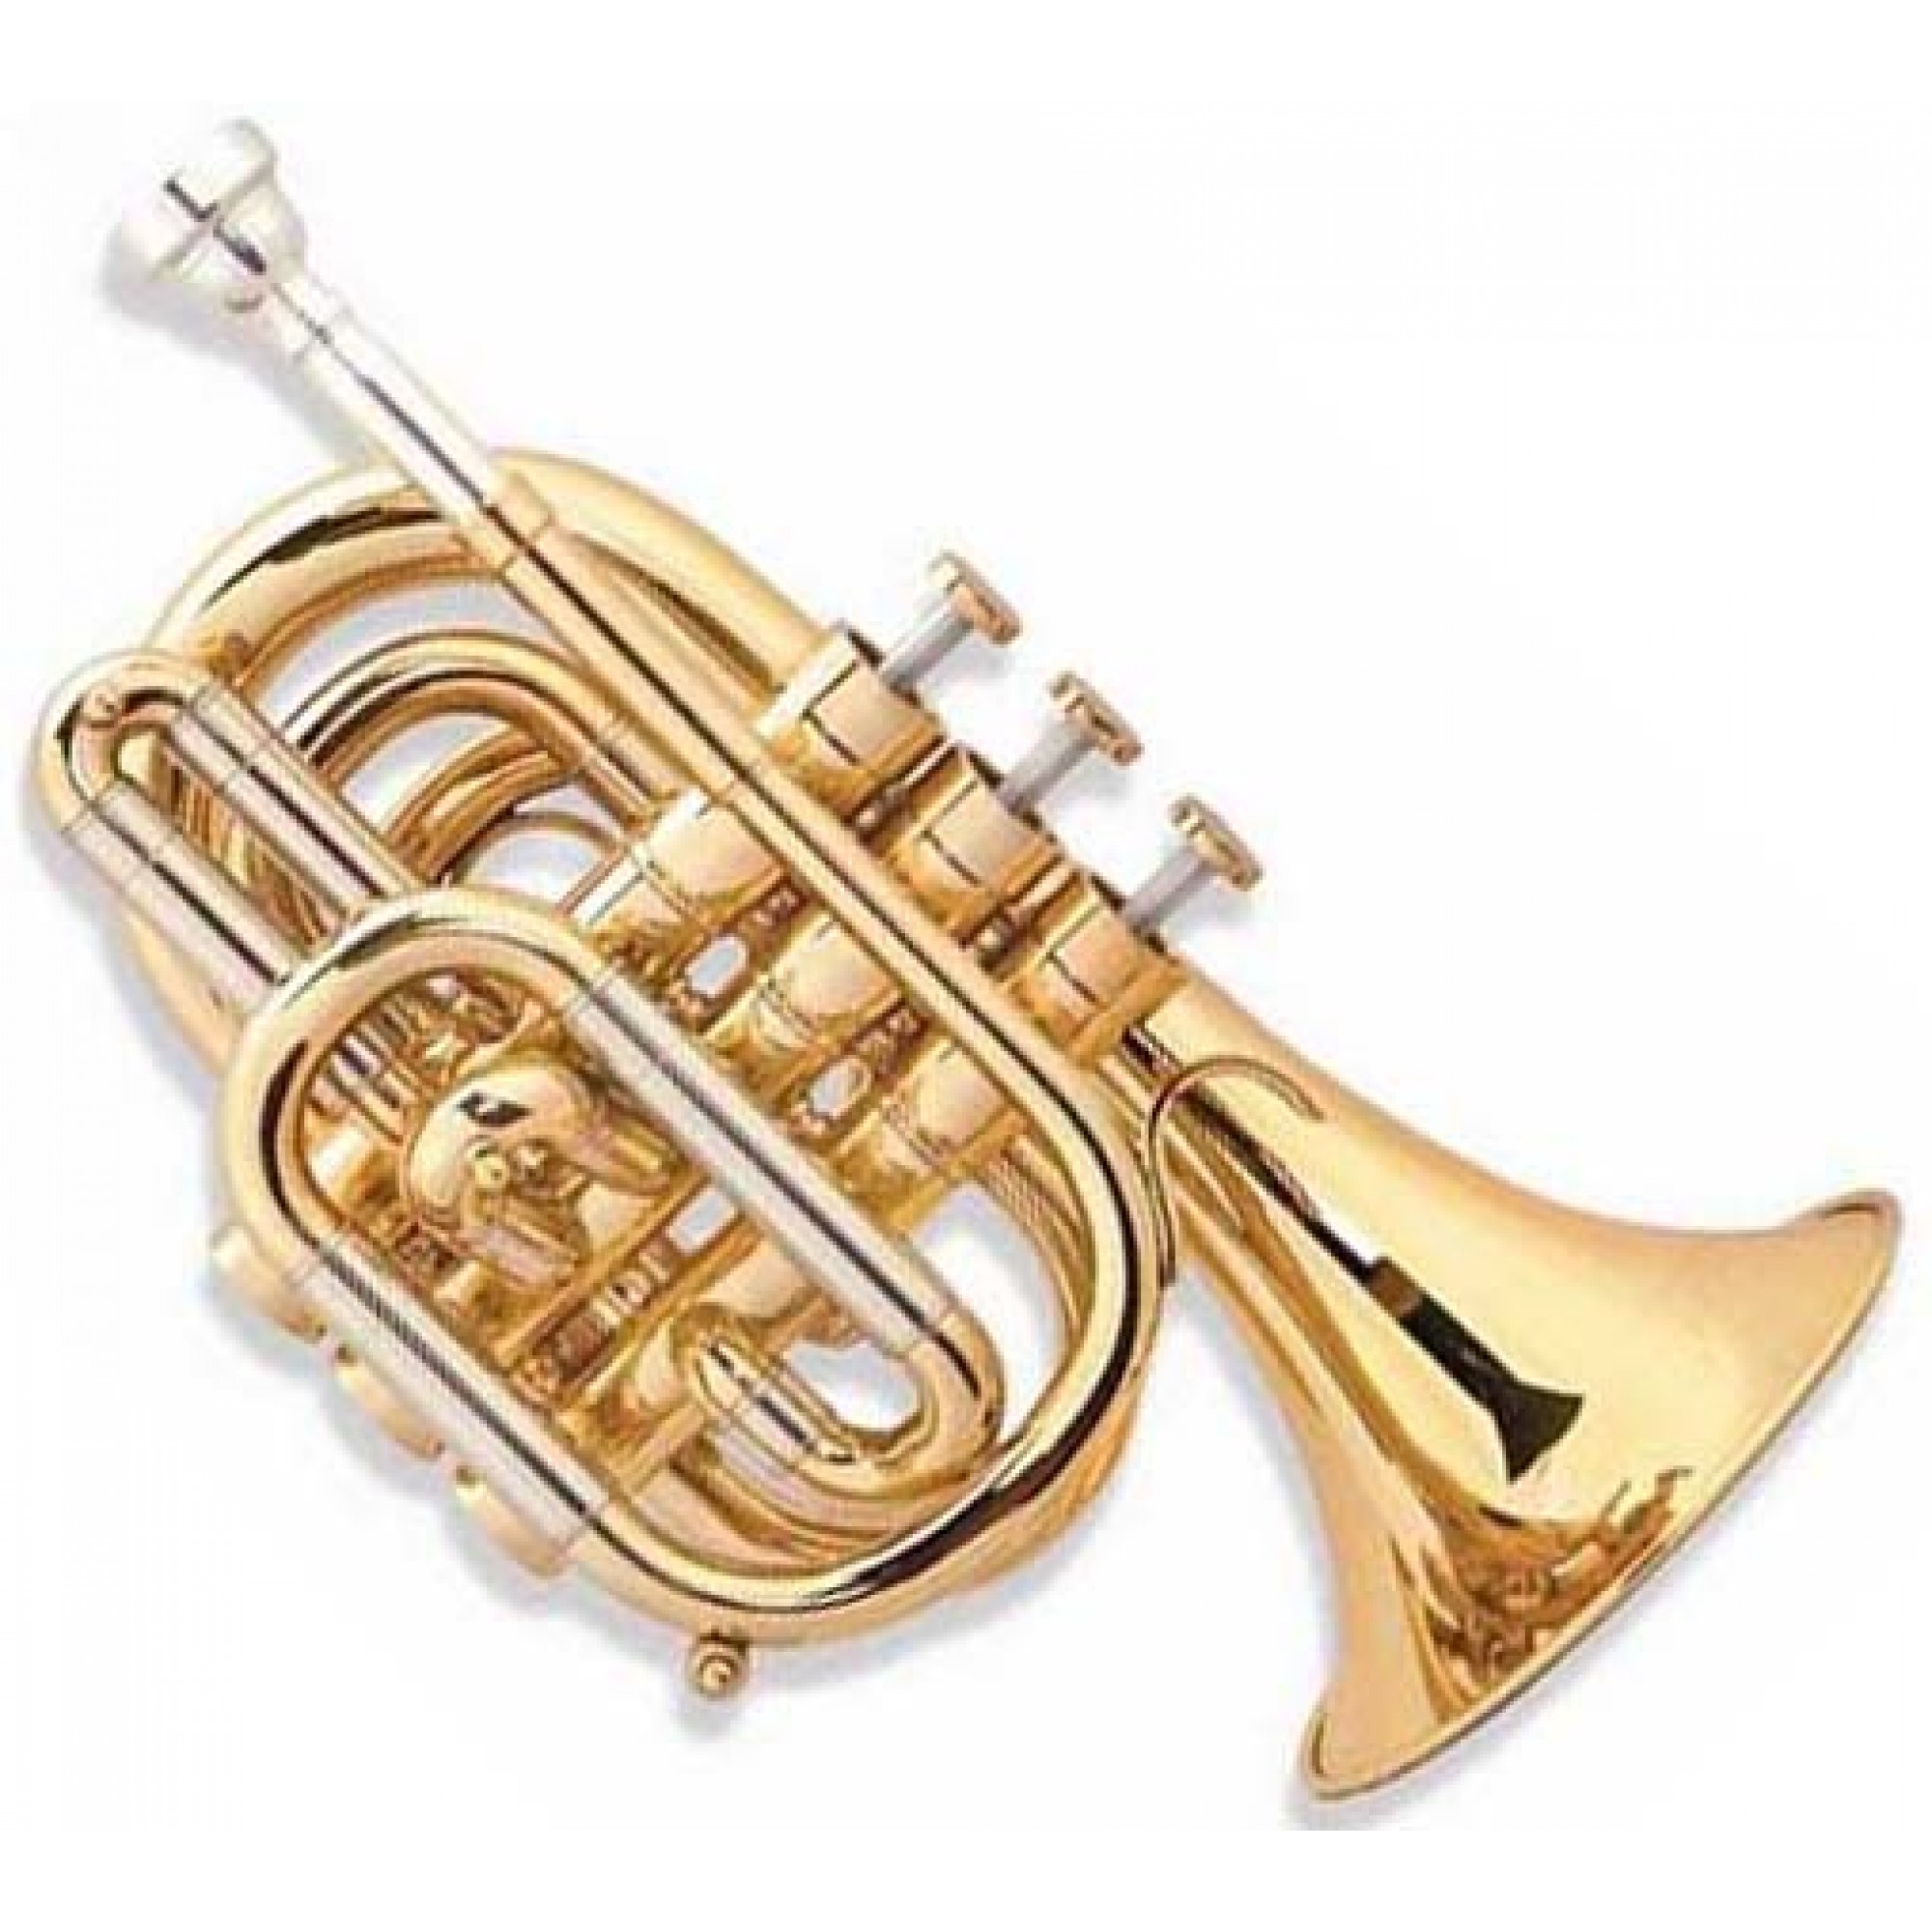 cornet-musical-instrument-png-image-png-all